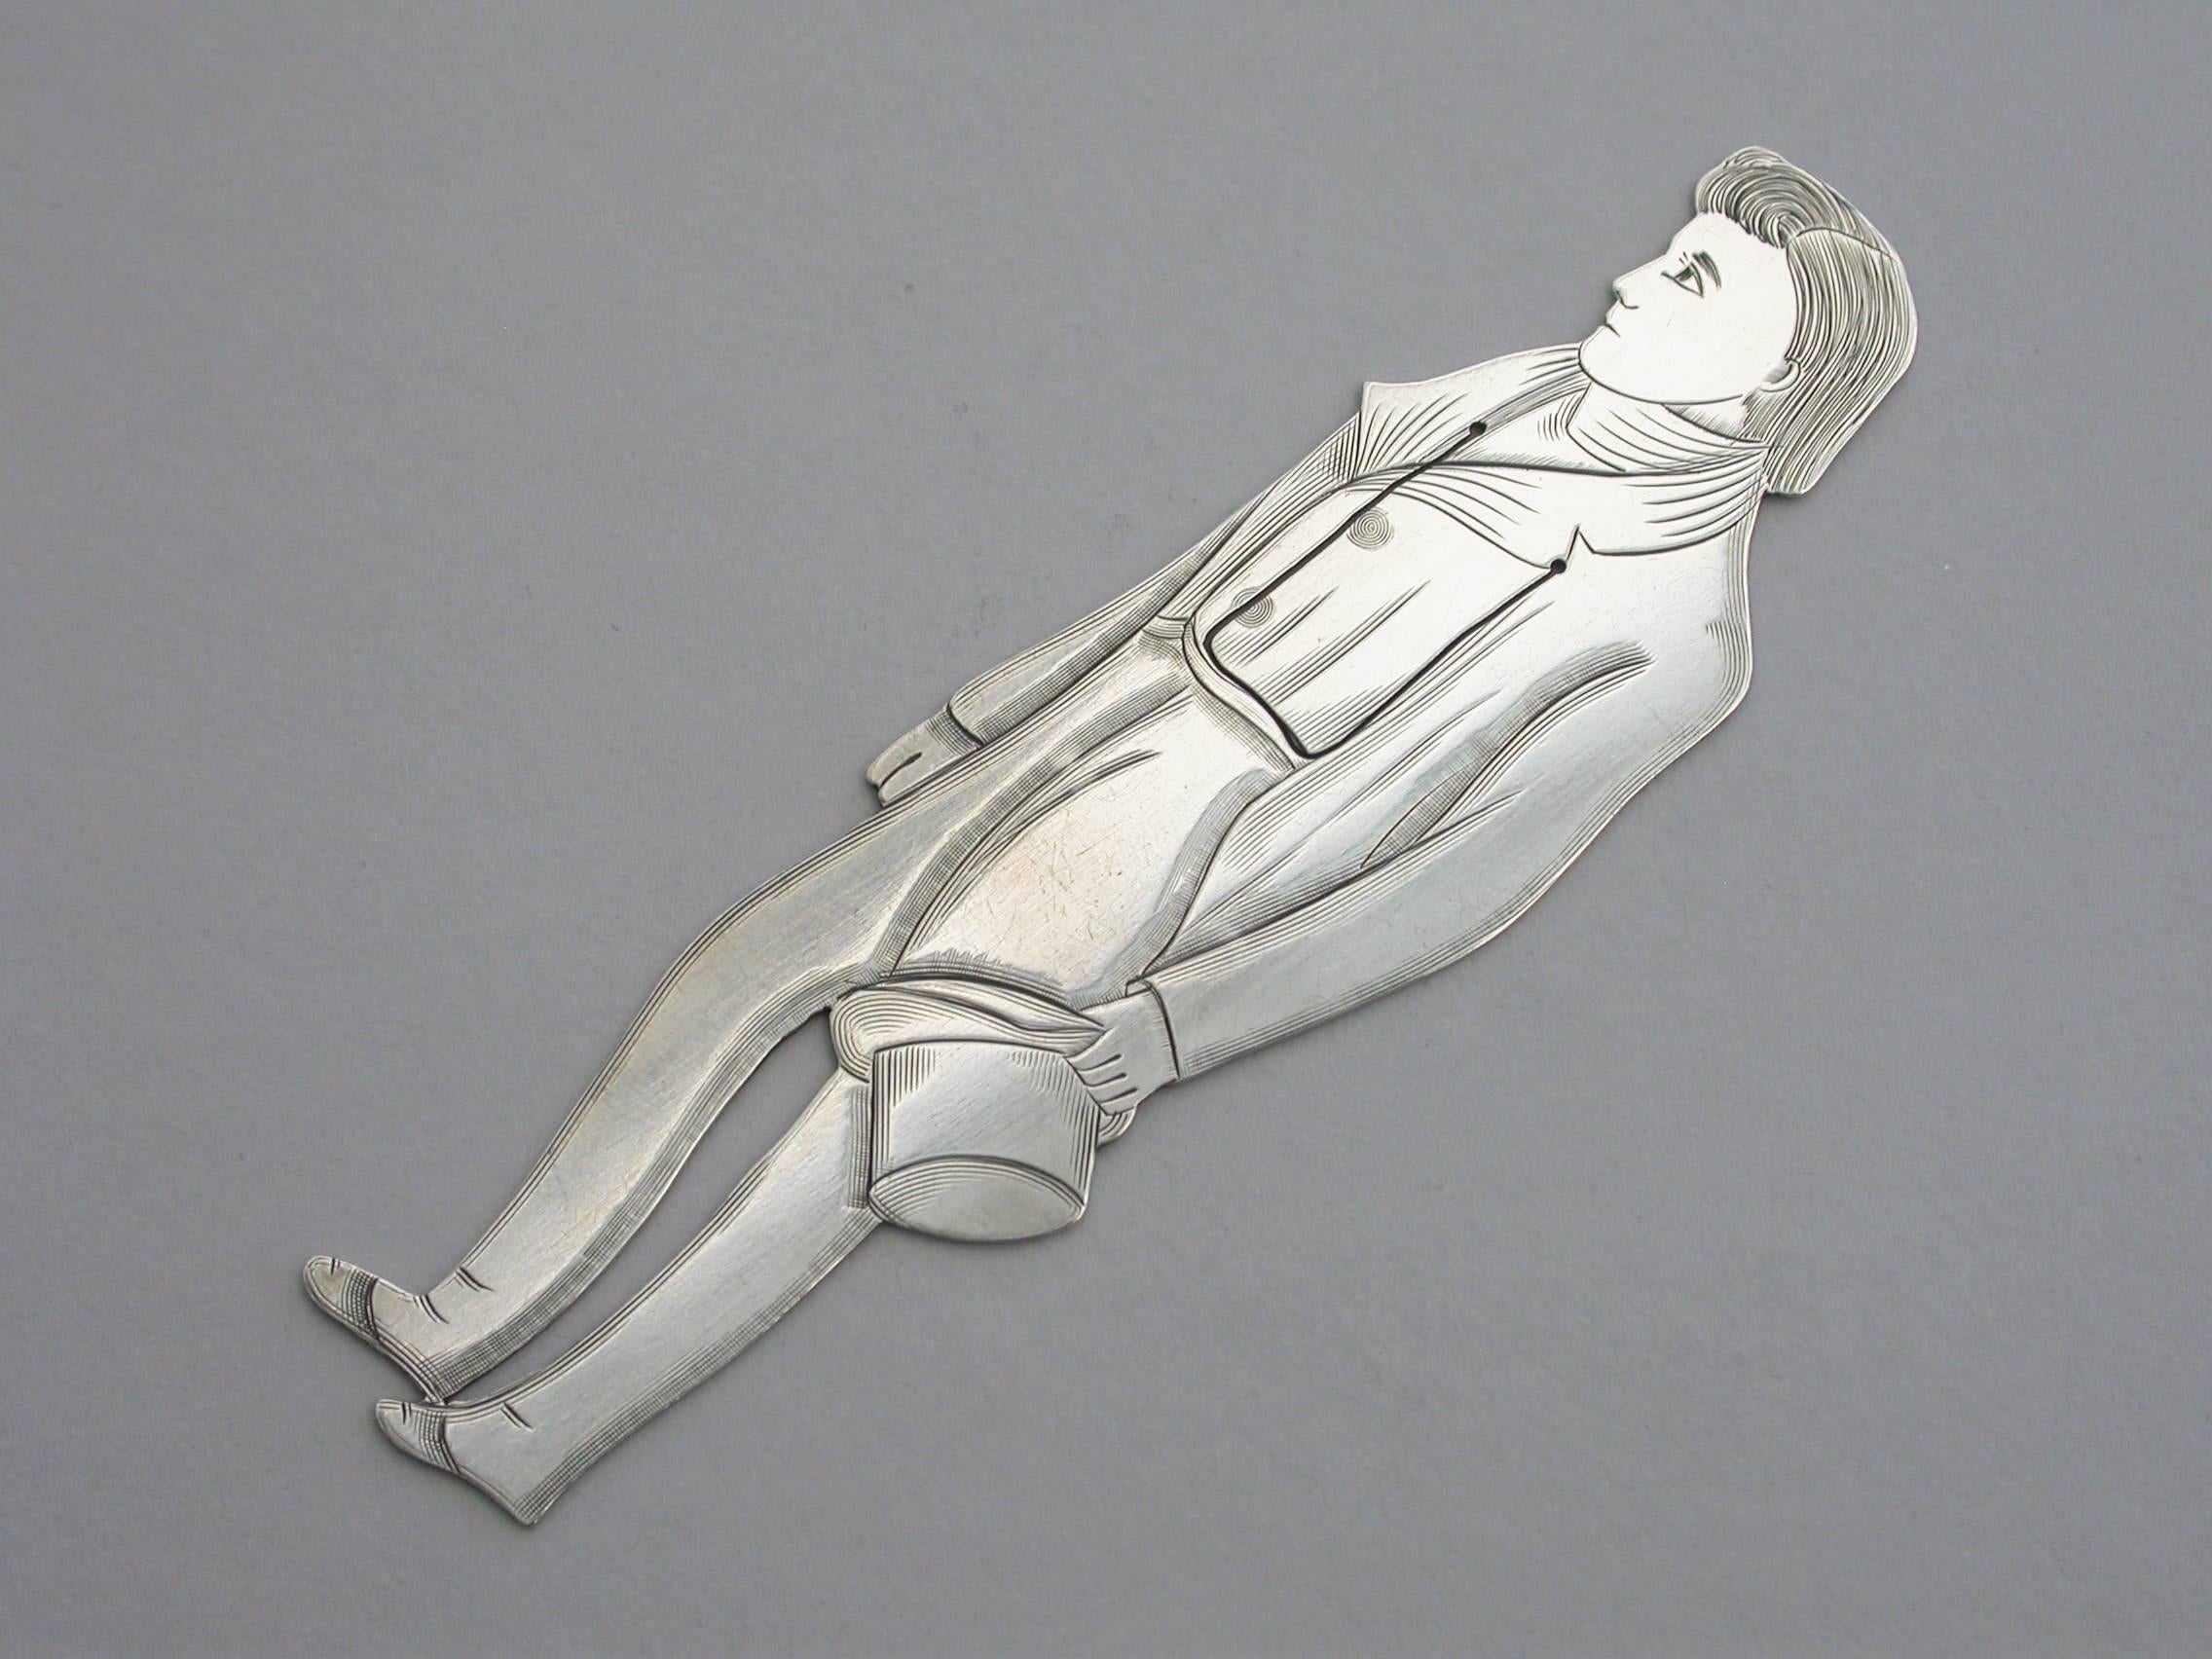 A rare early 20th century American novelty silver figural Bookmark, depicting the character Nicholas Nickleby from the Charles Dickens novel of the same name.

By J F Fradley, New York, circa 1901-1910
In good condition with no damage or